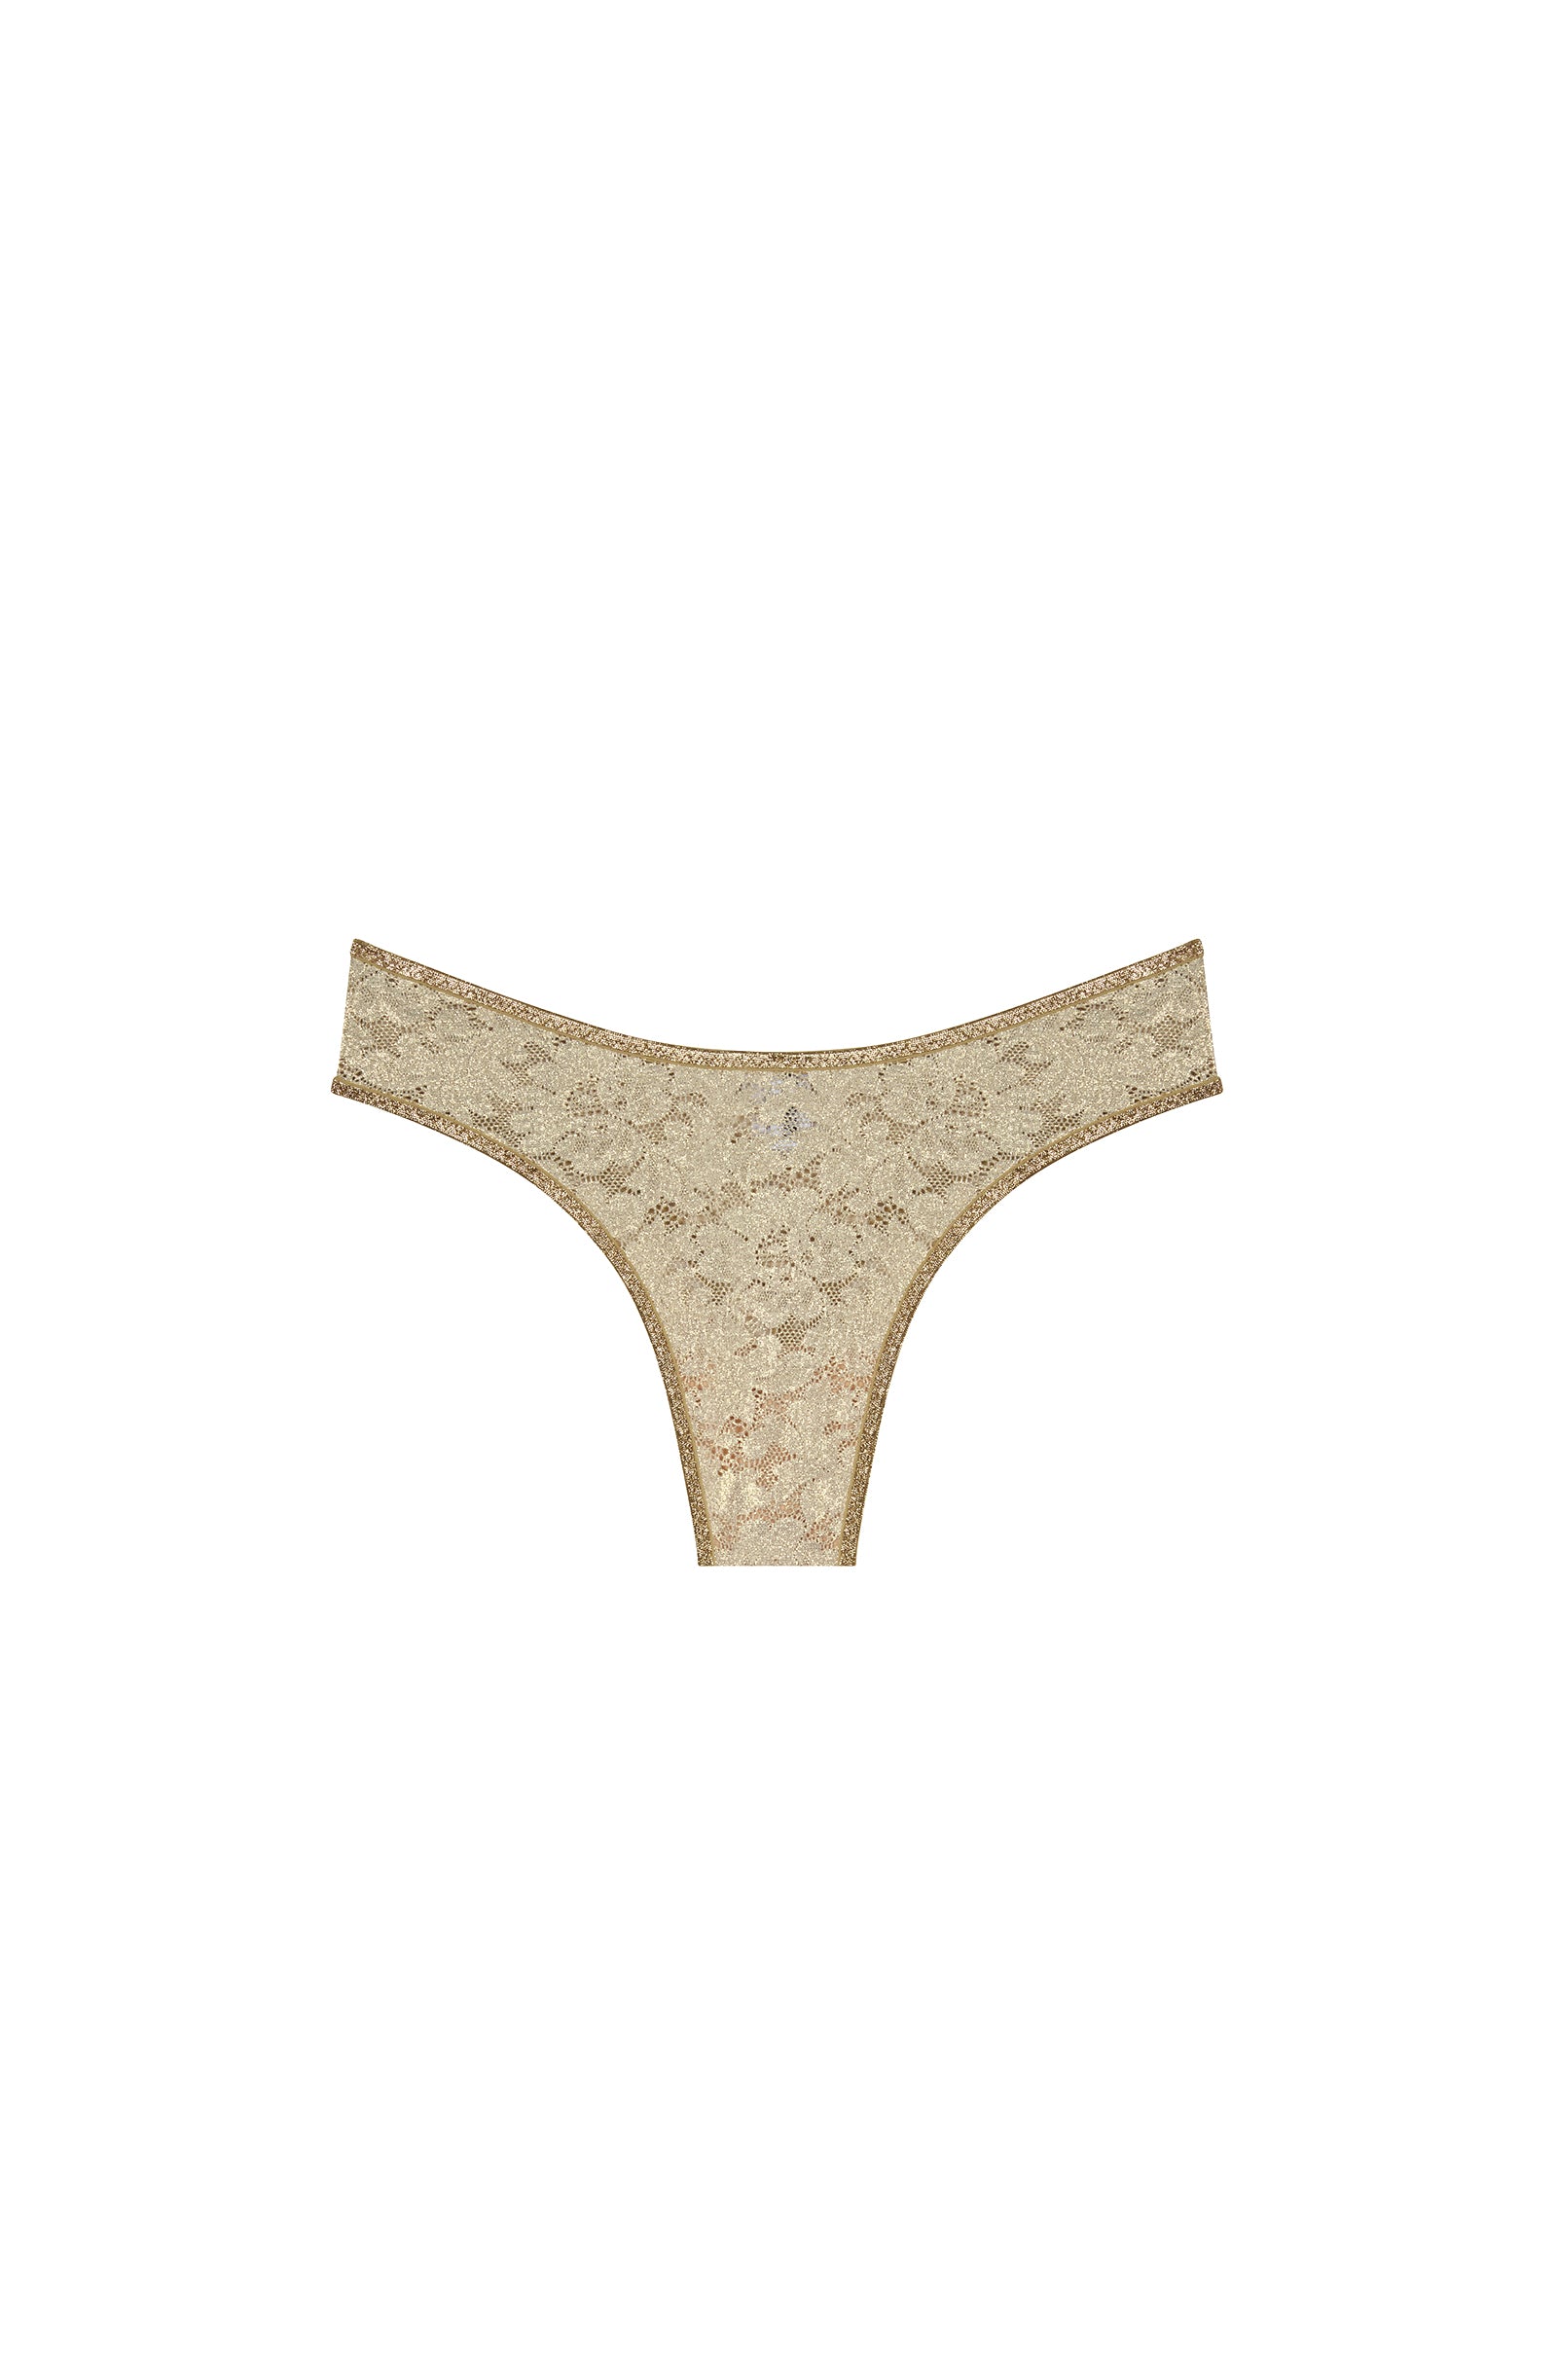 SELISA - Golden sand lacquered lace thong